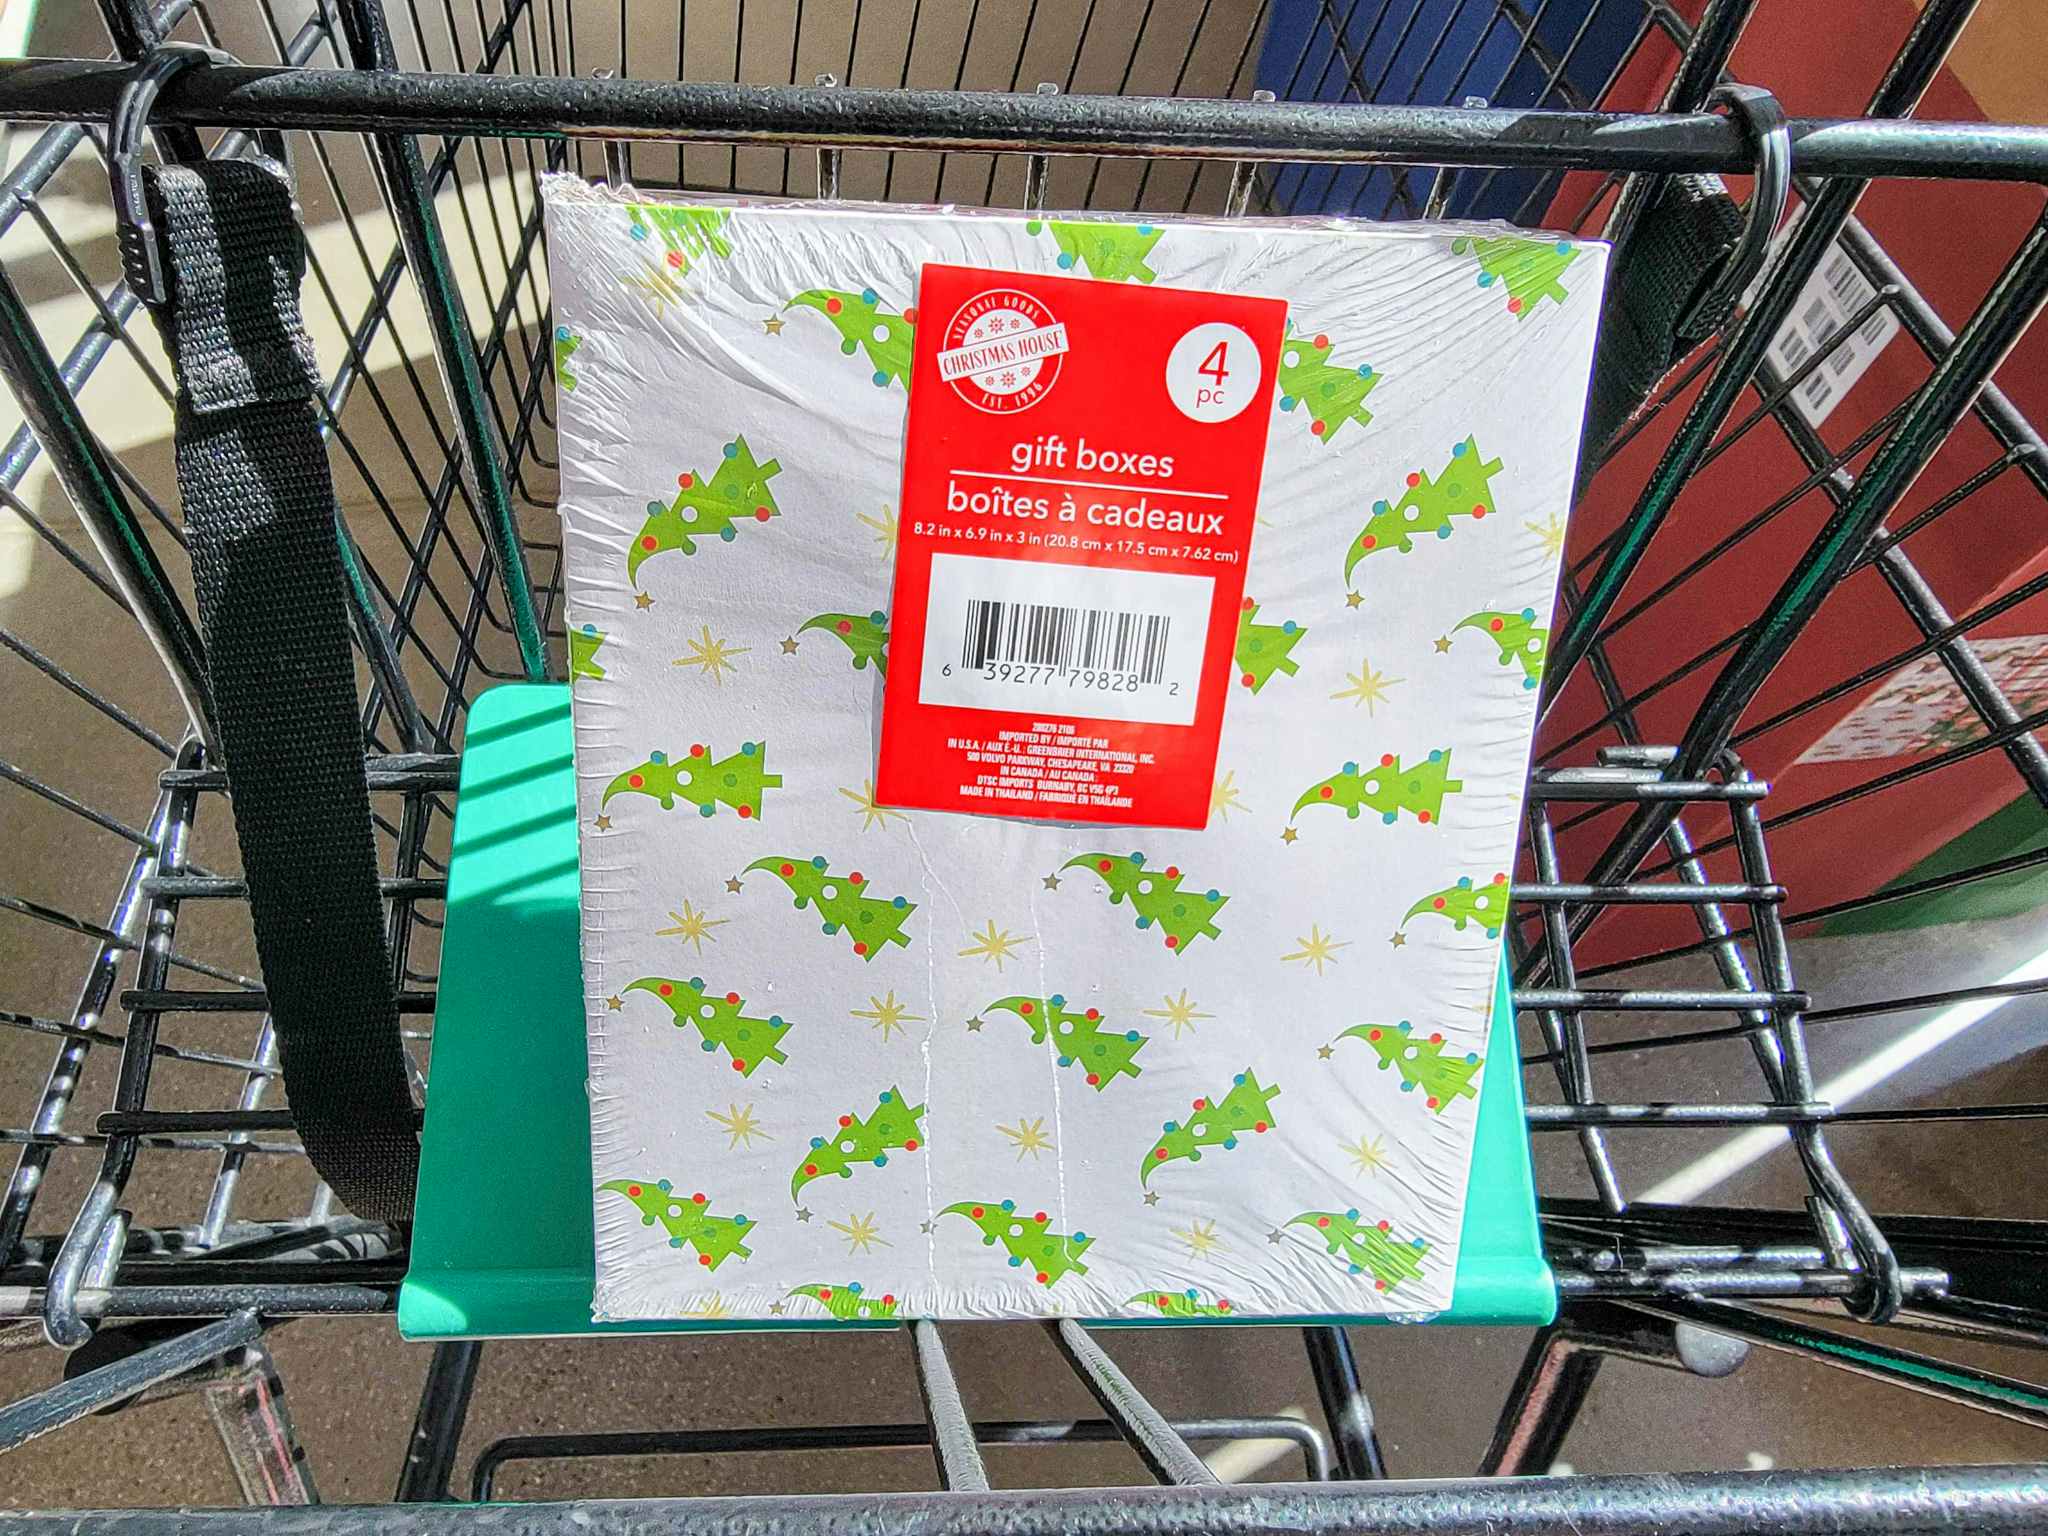 a pack of 4 shirt size christmas gift boxes in a cart